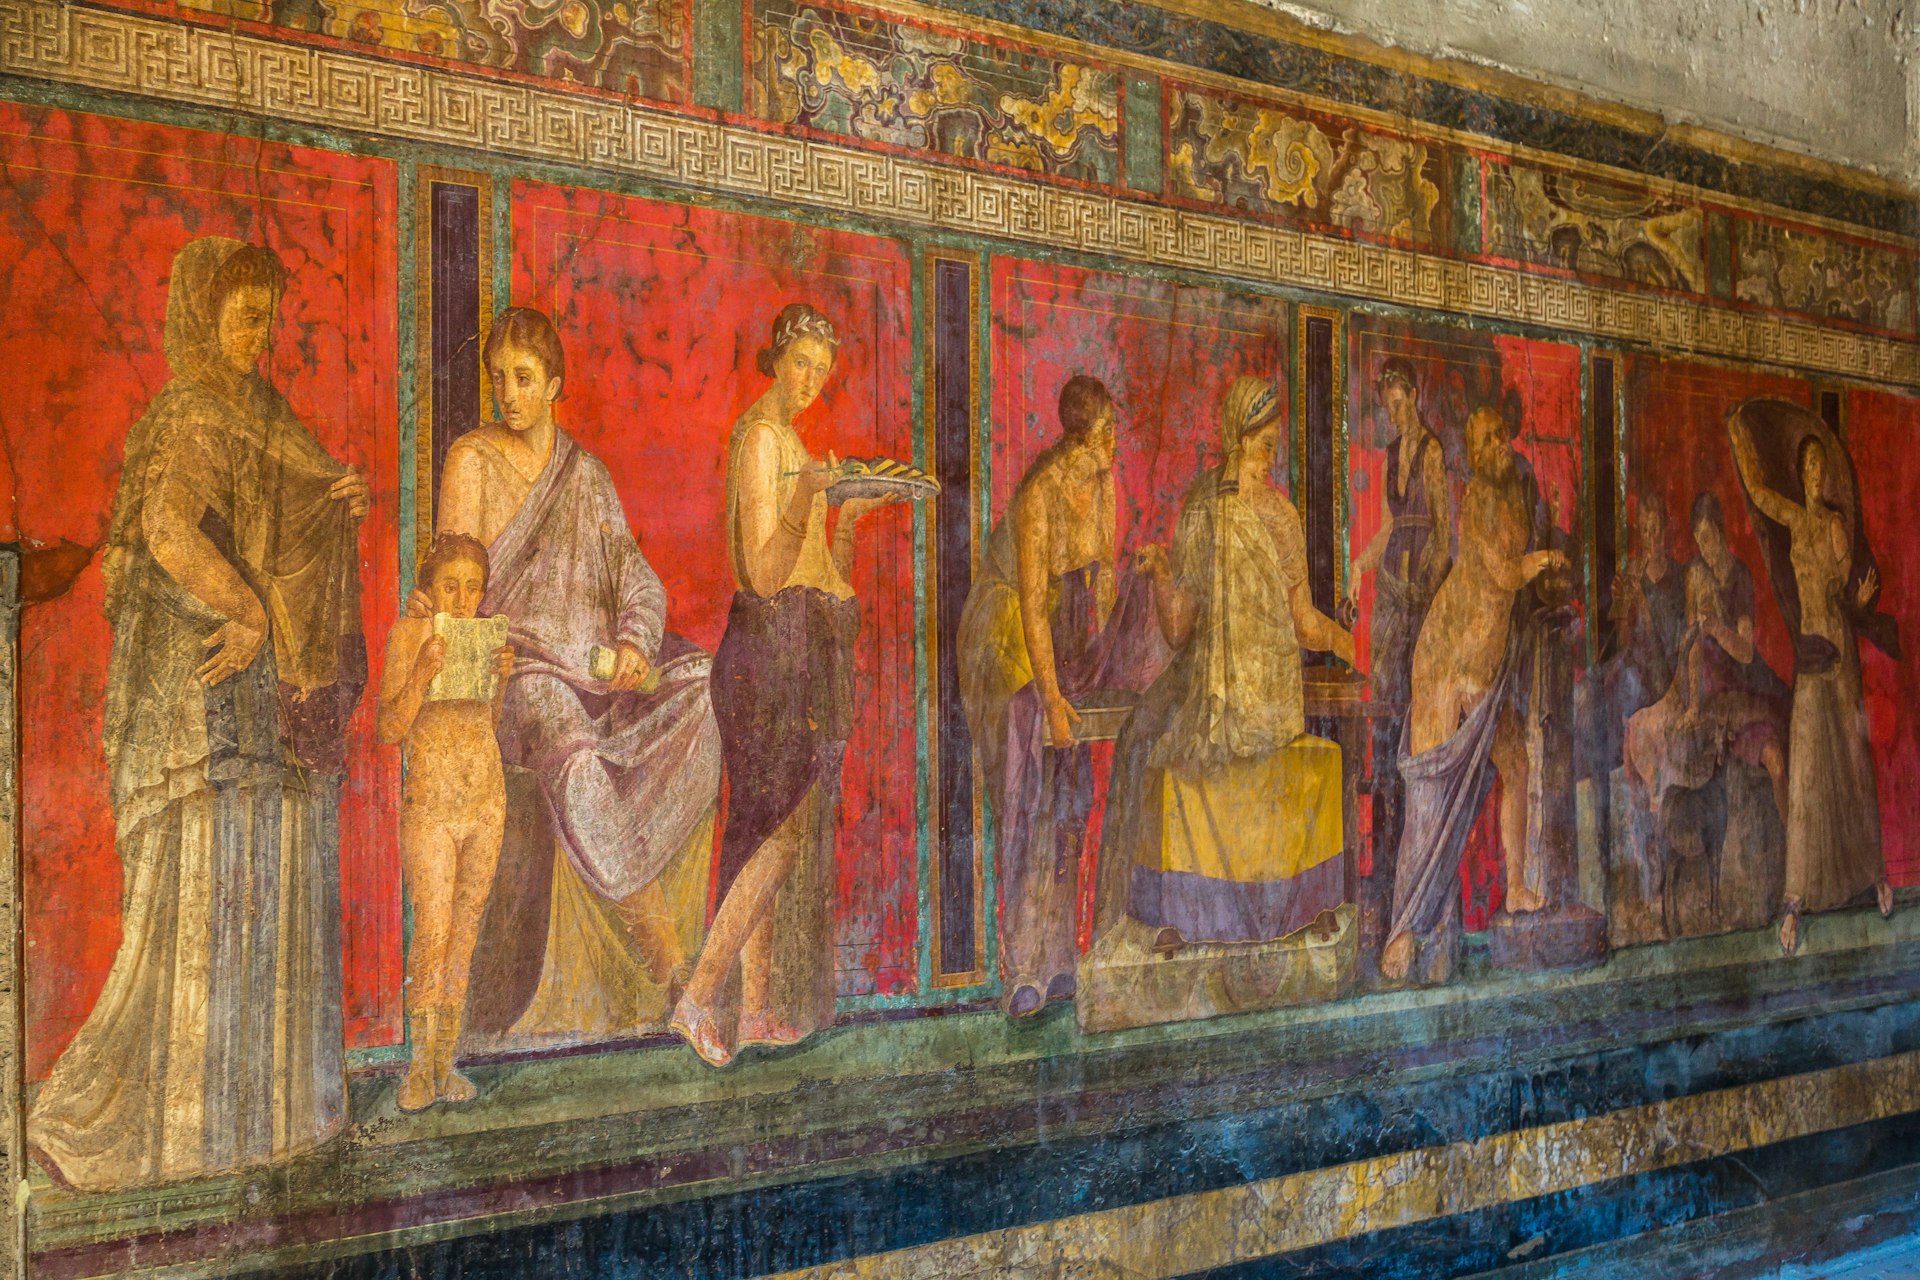 Painted wall in Pompeii, which was destroyed in 79 AD by the eruption of Mt. Vesuvius